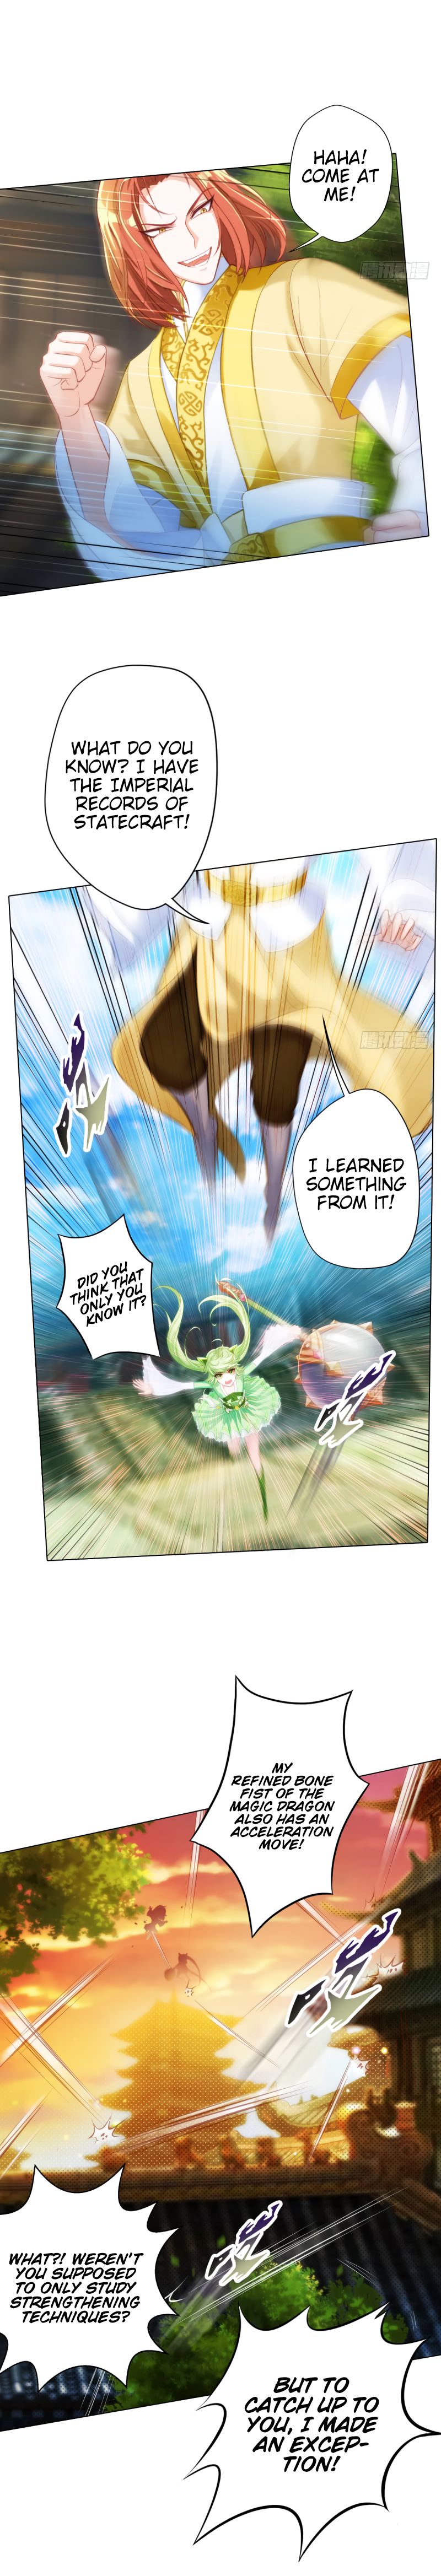 Lang Huan Library Chapter 18 page 5